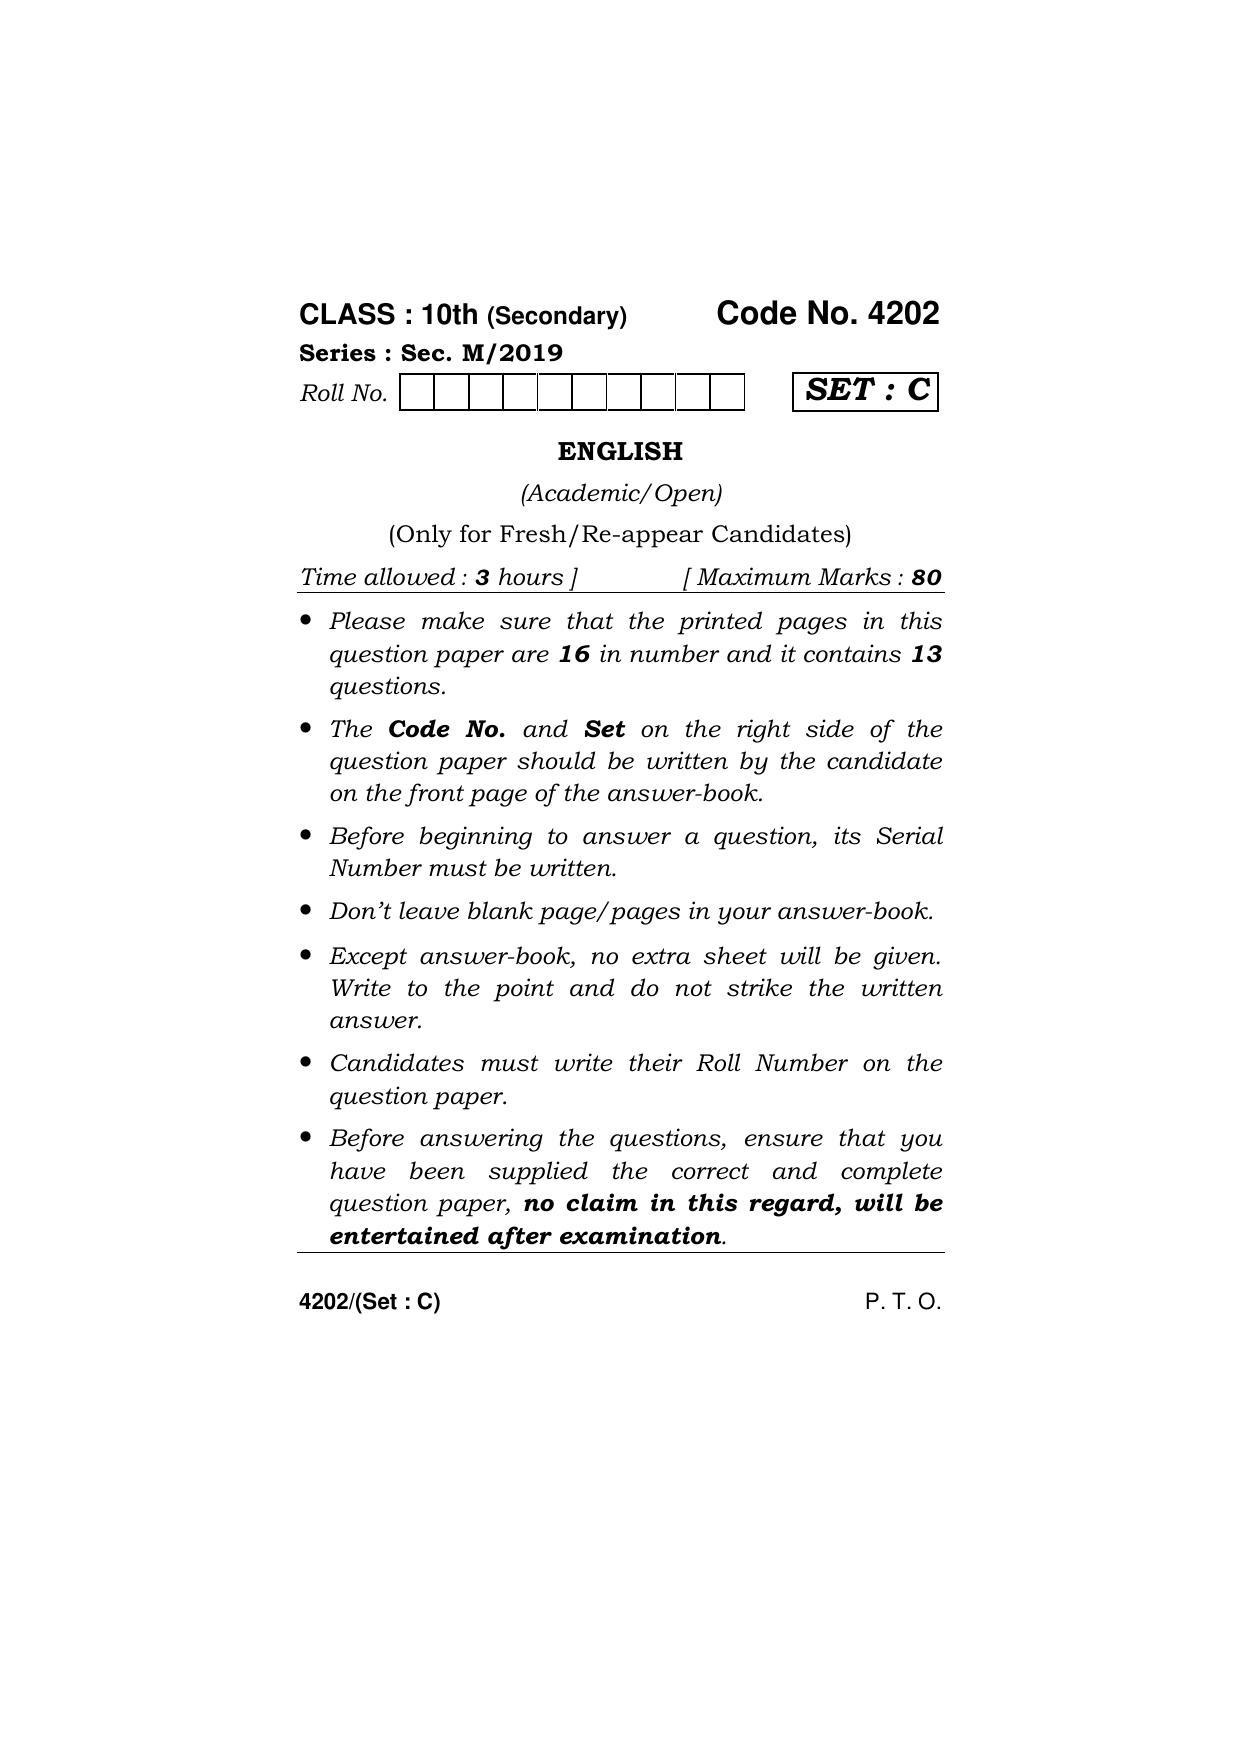 Haryana Board HBSE Class 10 English (All Set) 2019 Question Paper - Page 33